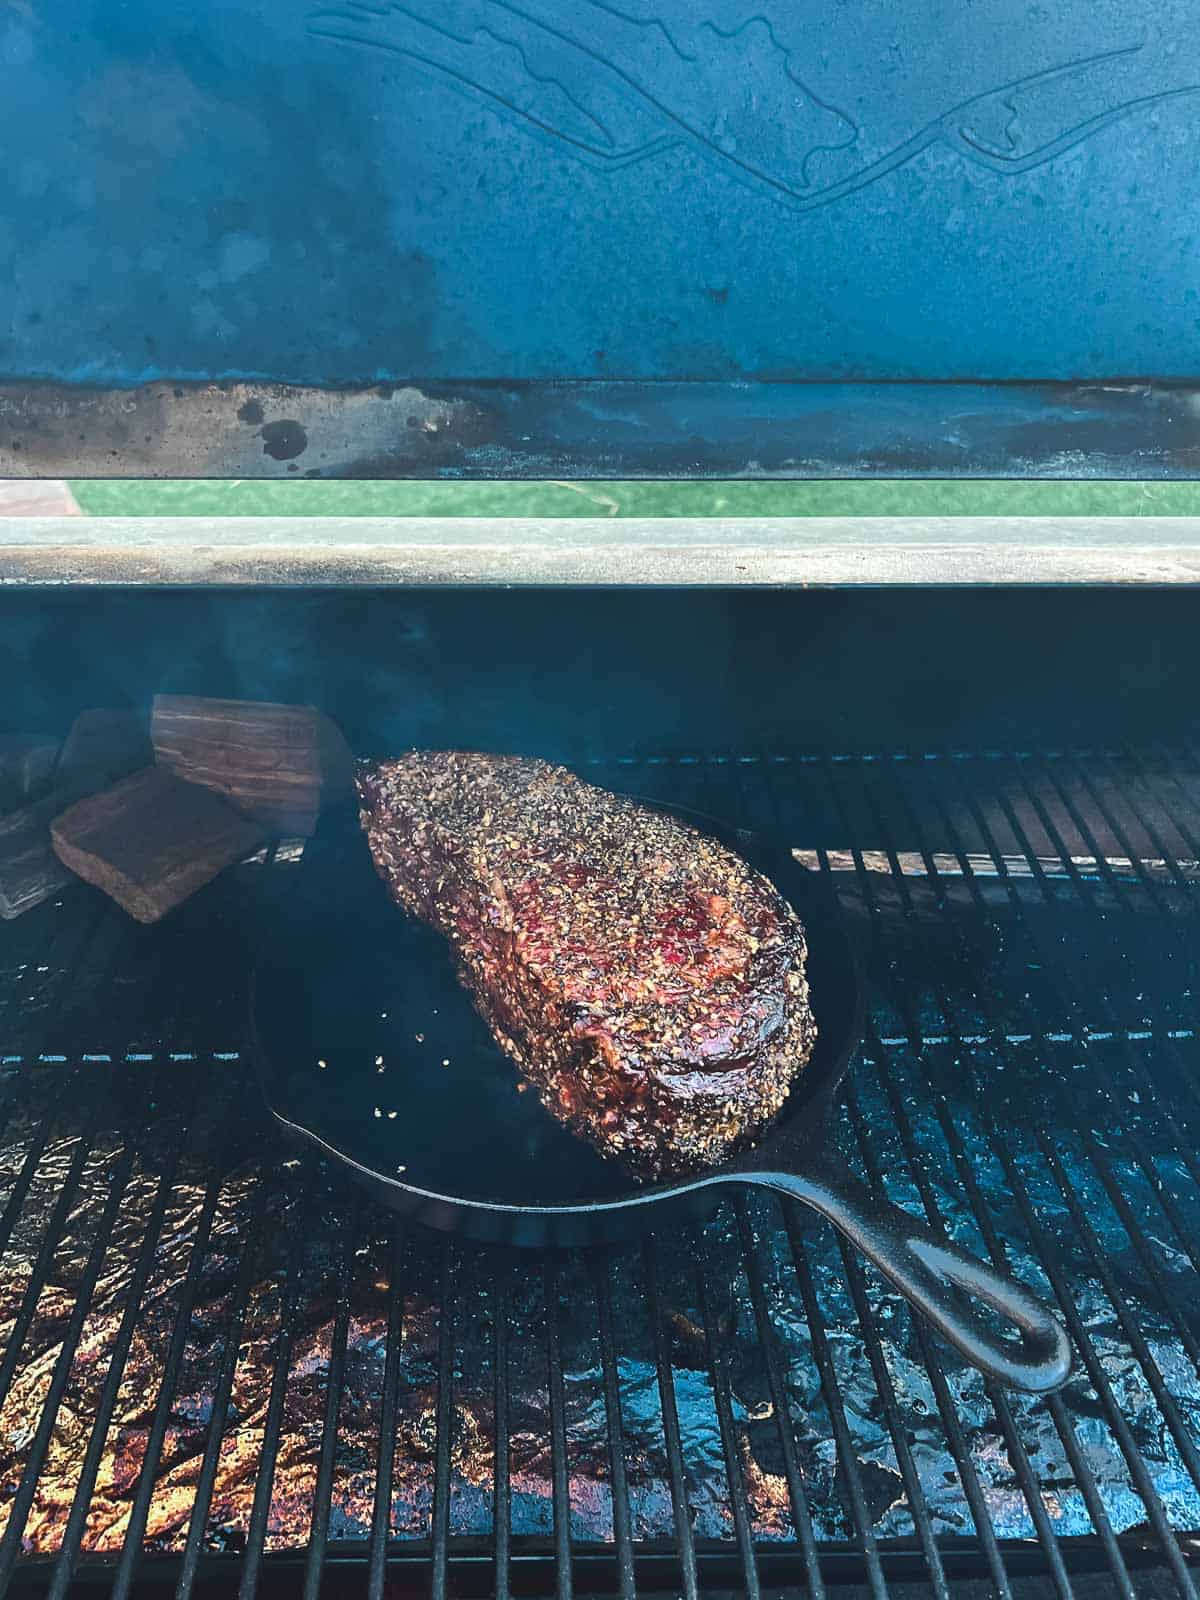 A rib roast is being seared in a cast iron skillet.